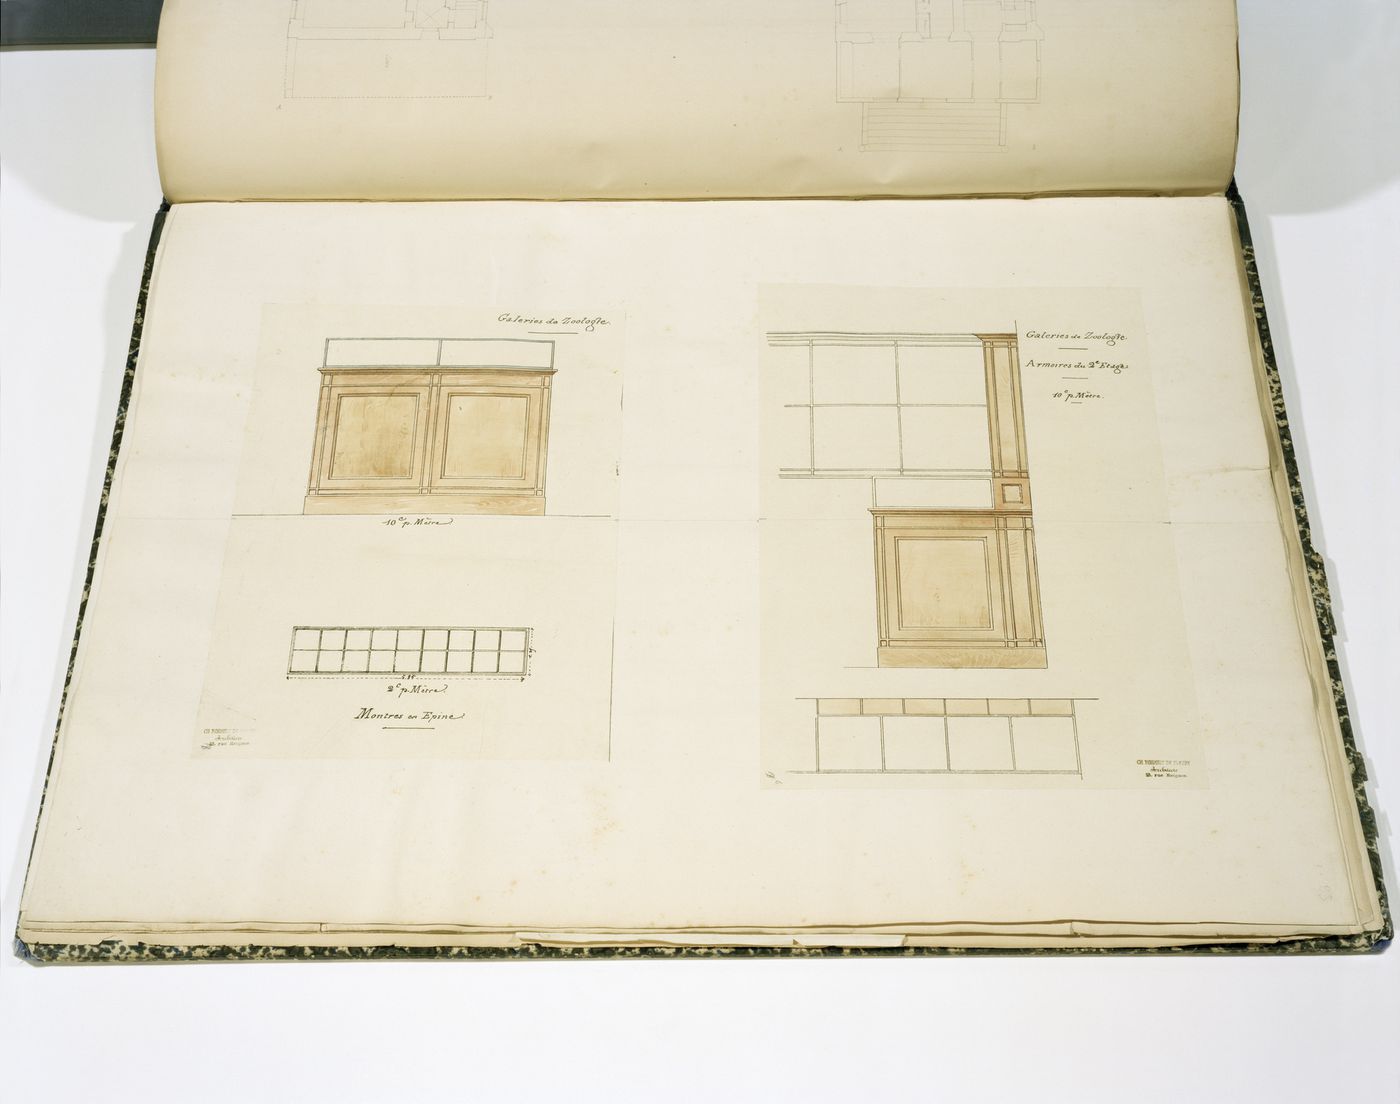 Questioning Pictures: Photograph of design development drawings for a «Galerie de zoologie» by Charles Rohault de Fleury, mid 19th century